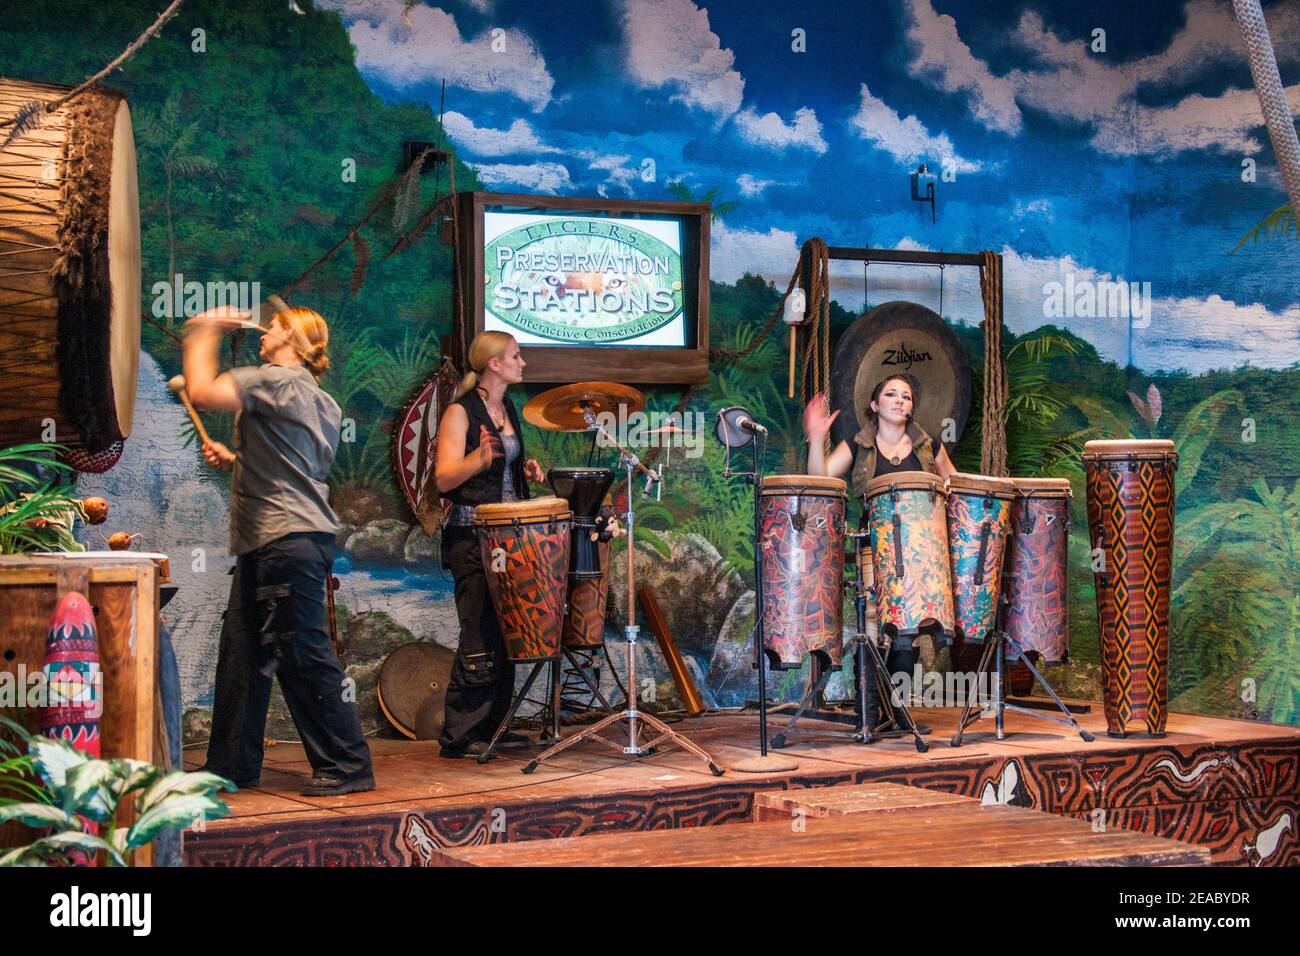 An African Drum Performance in the Parrot Theater at Jungle Island in Miami, Florida. Stock Photo